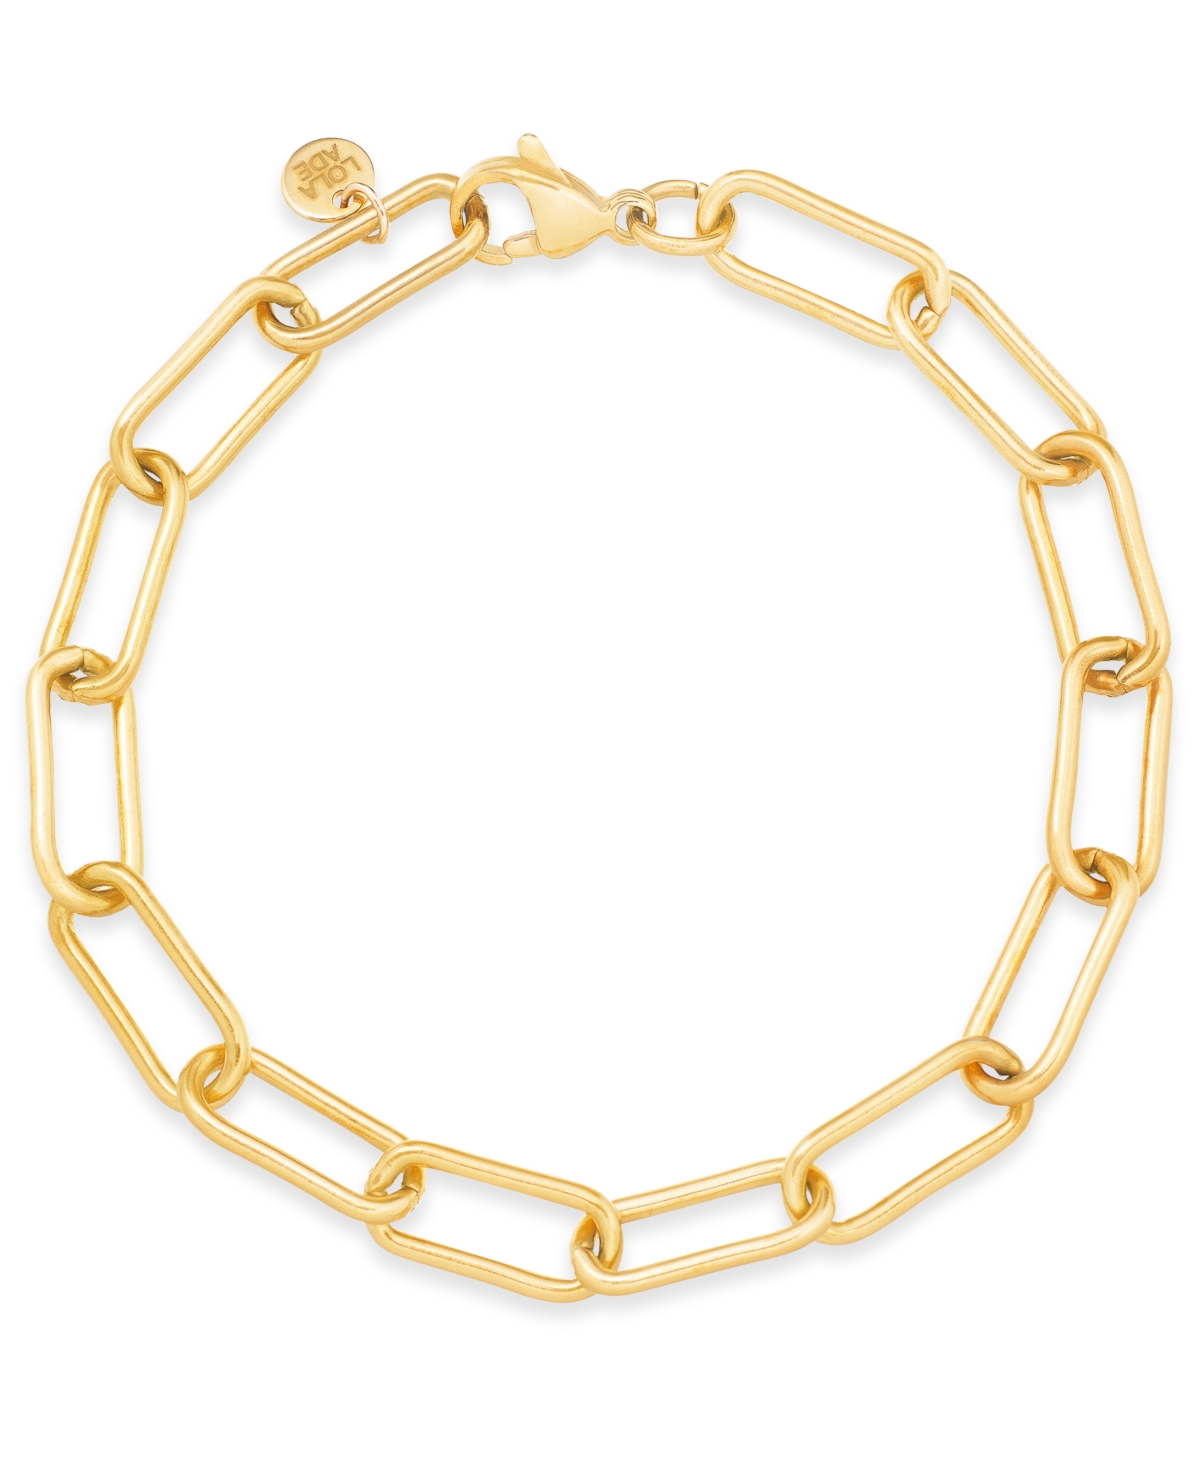 Lola Ade 18k Gold-plated Stainless Steel Paperclip Chain Link Bracelet